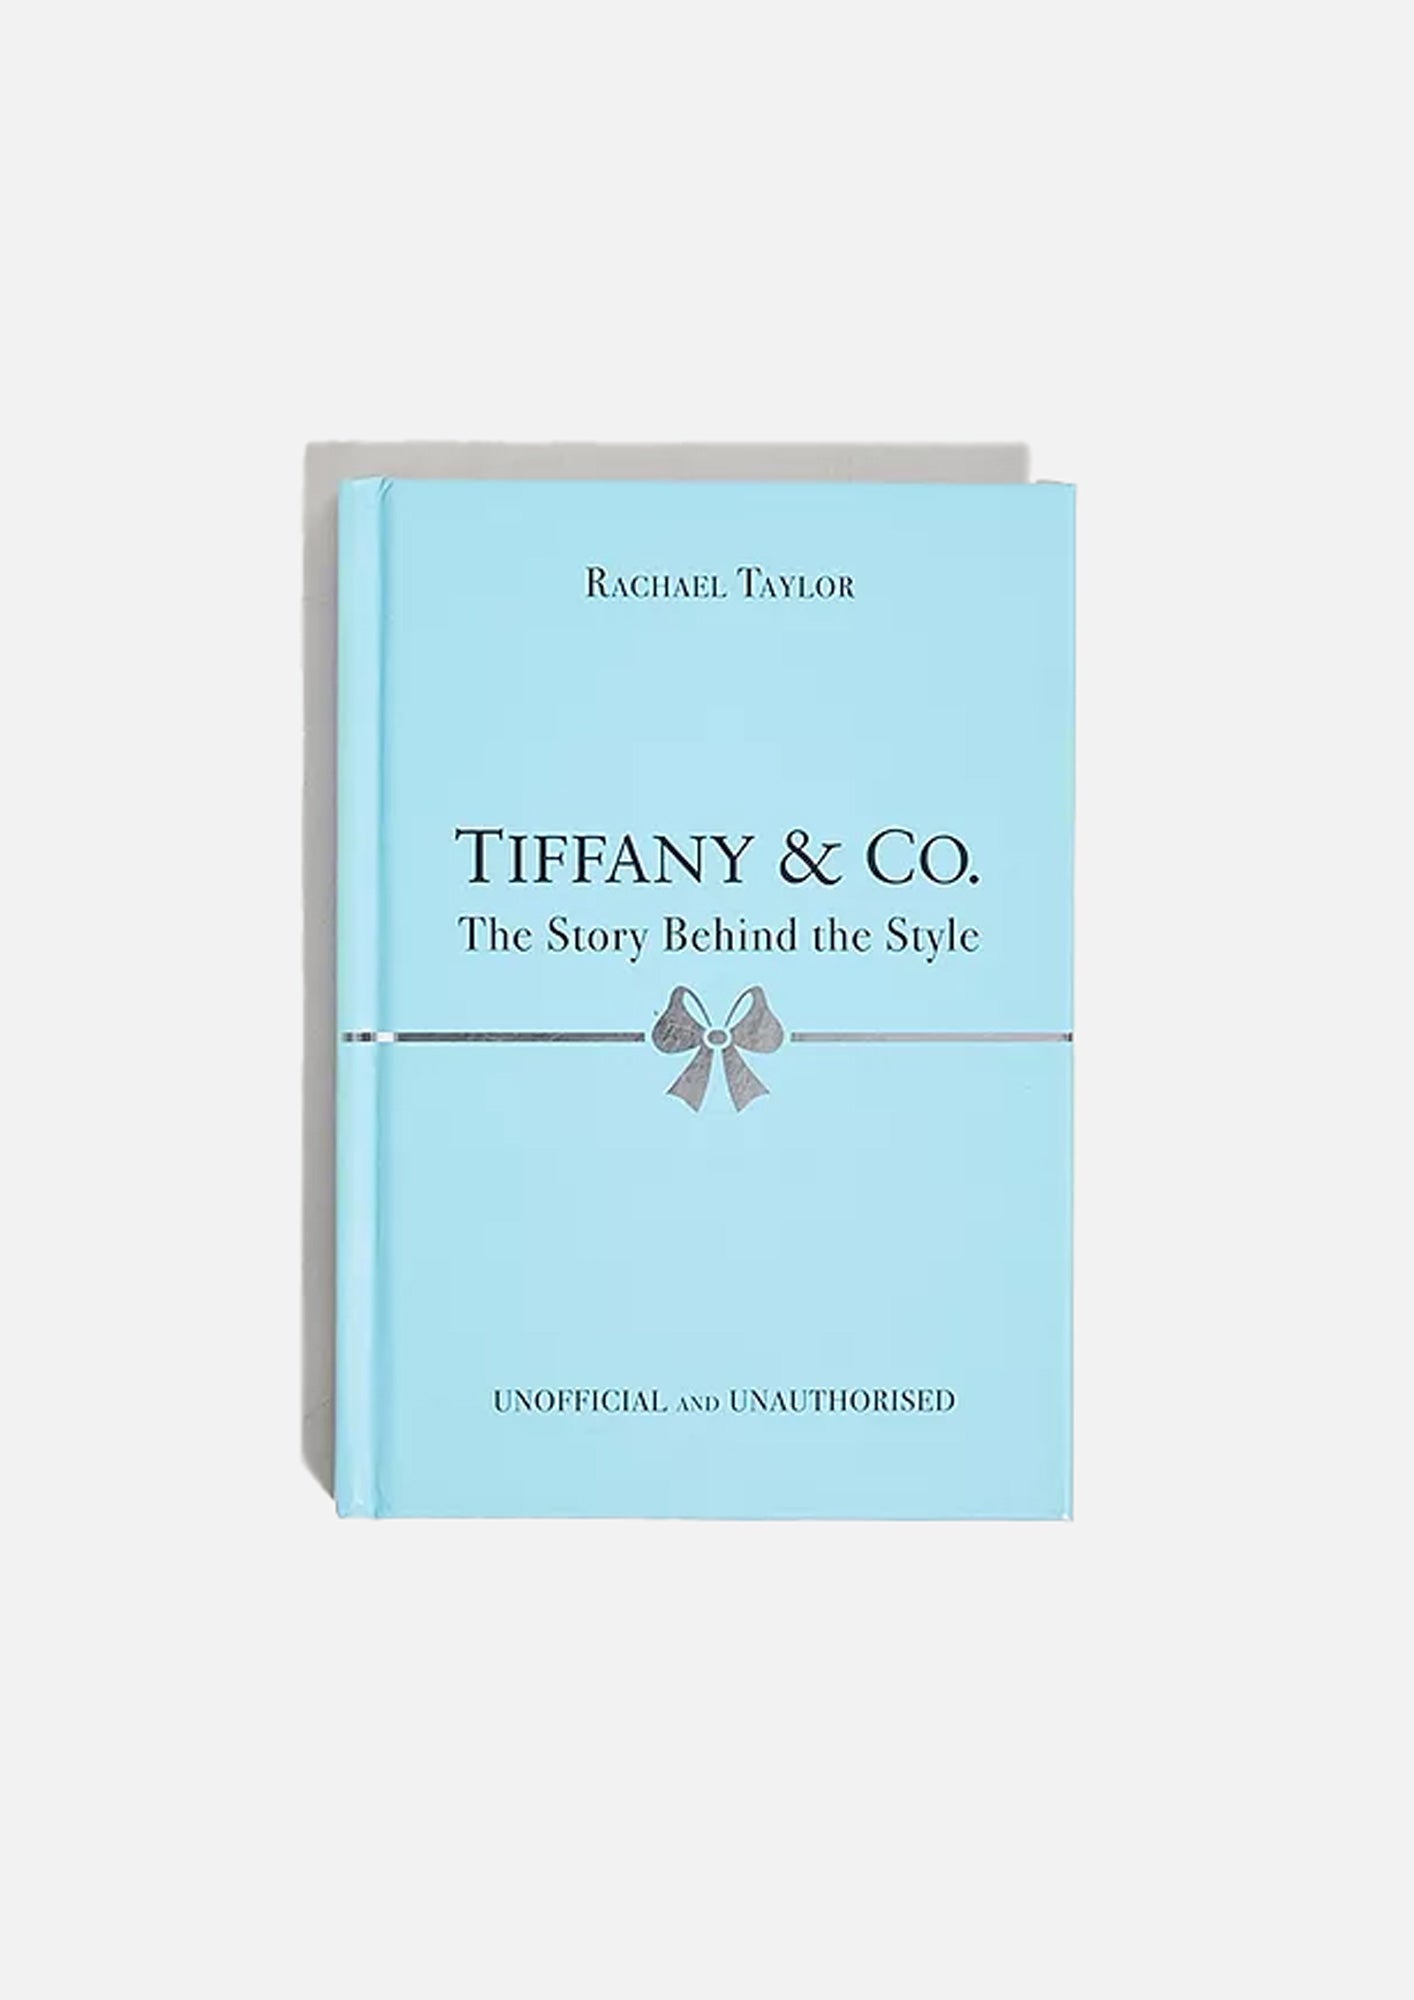 Tiffany & Co: The story behind the style